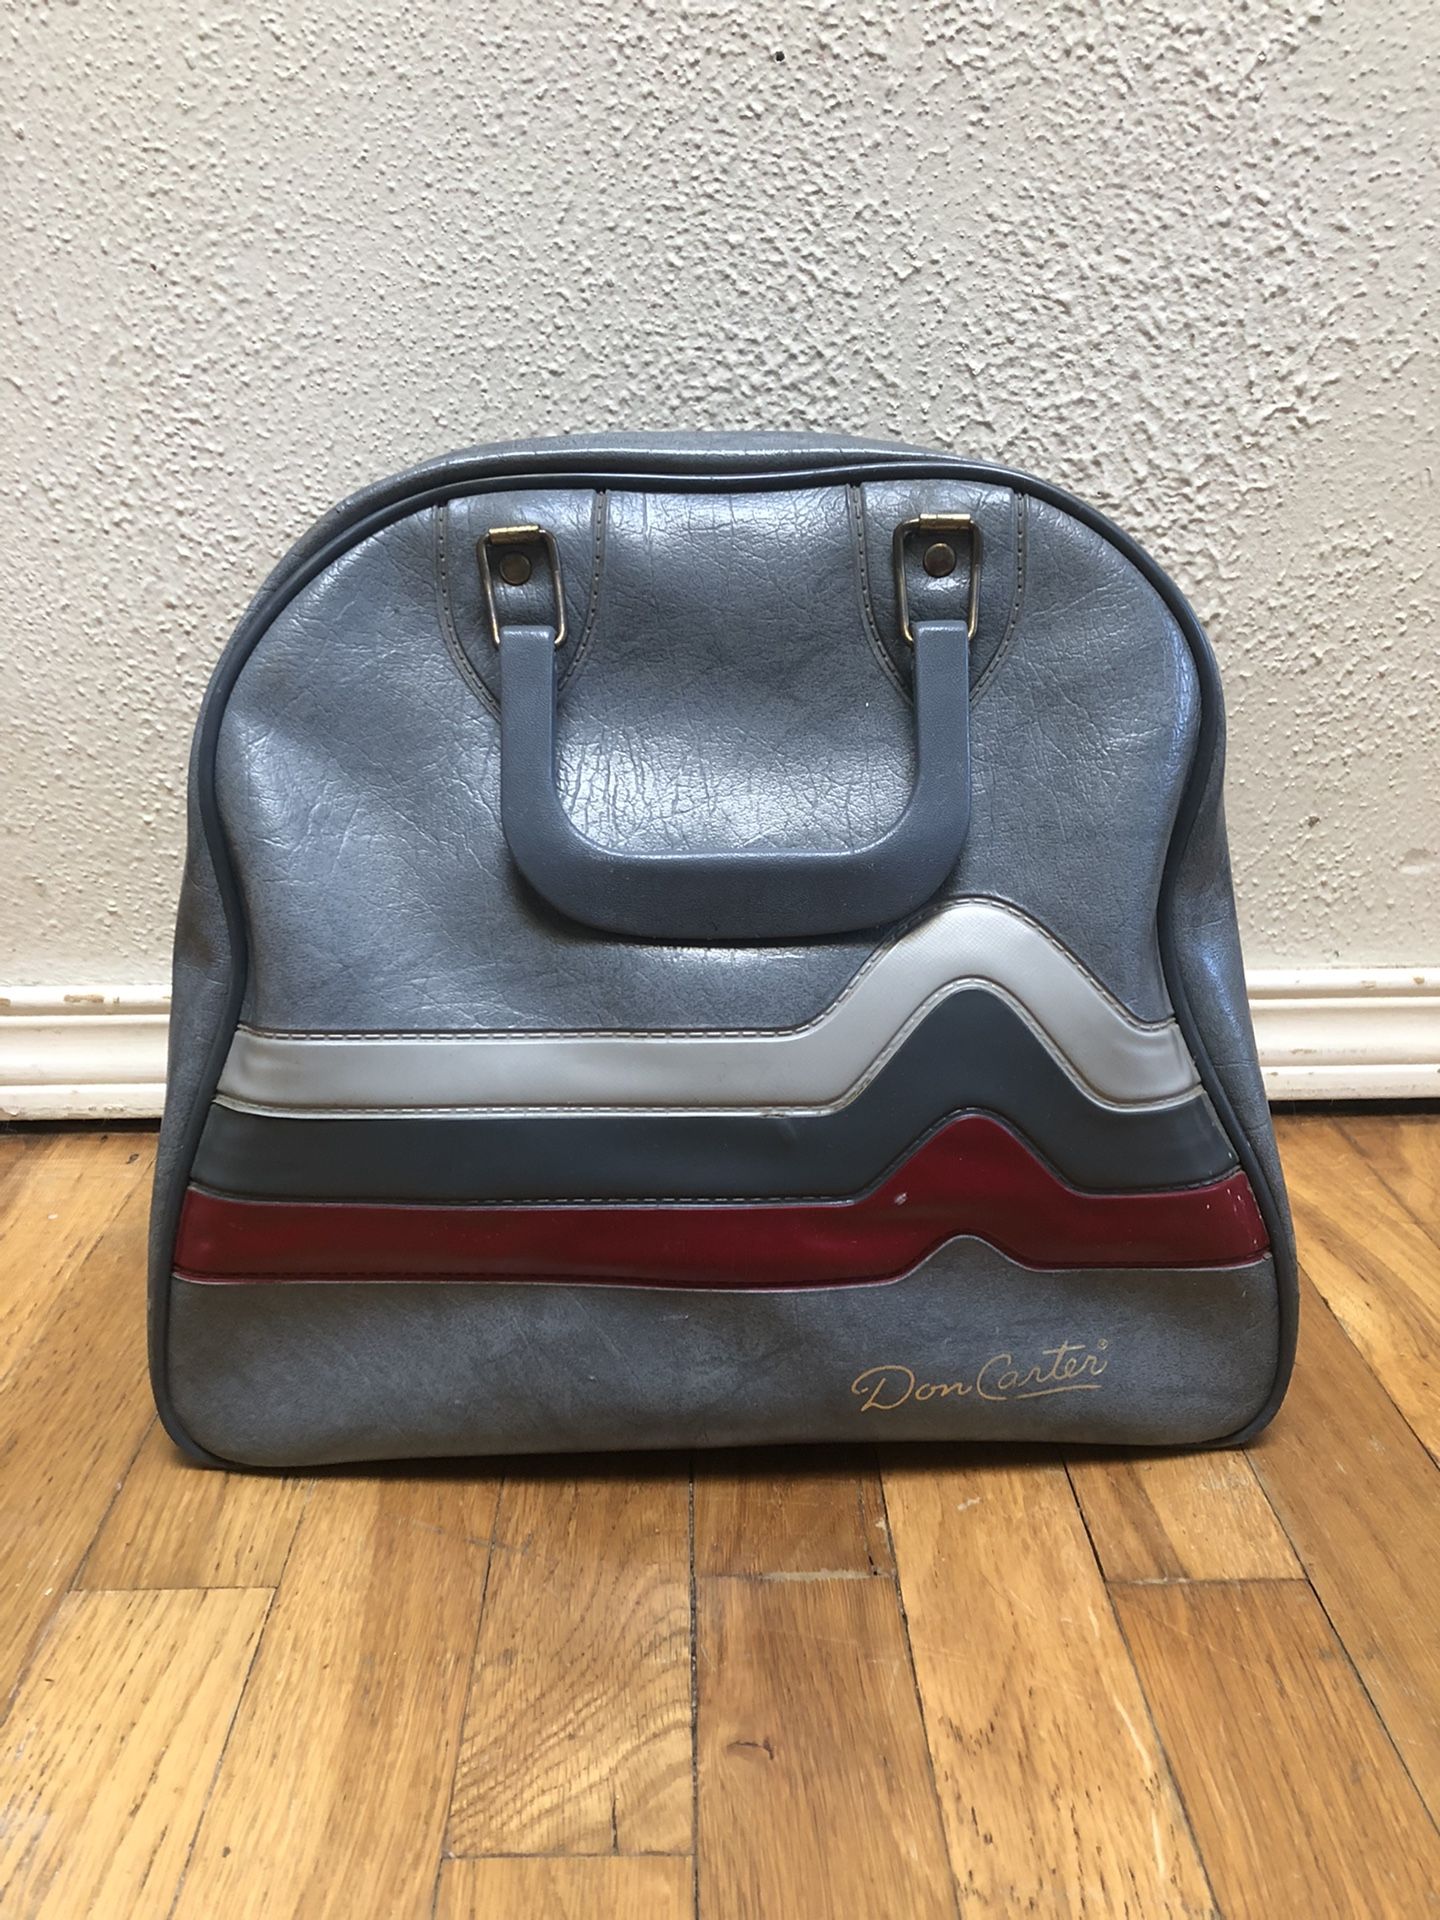 Vintage Brunswick Bowling Bag for Sale in Port Orchard, WA - OfferUp